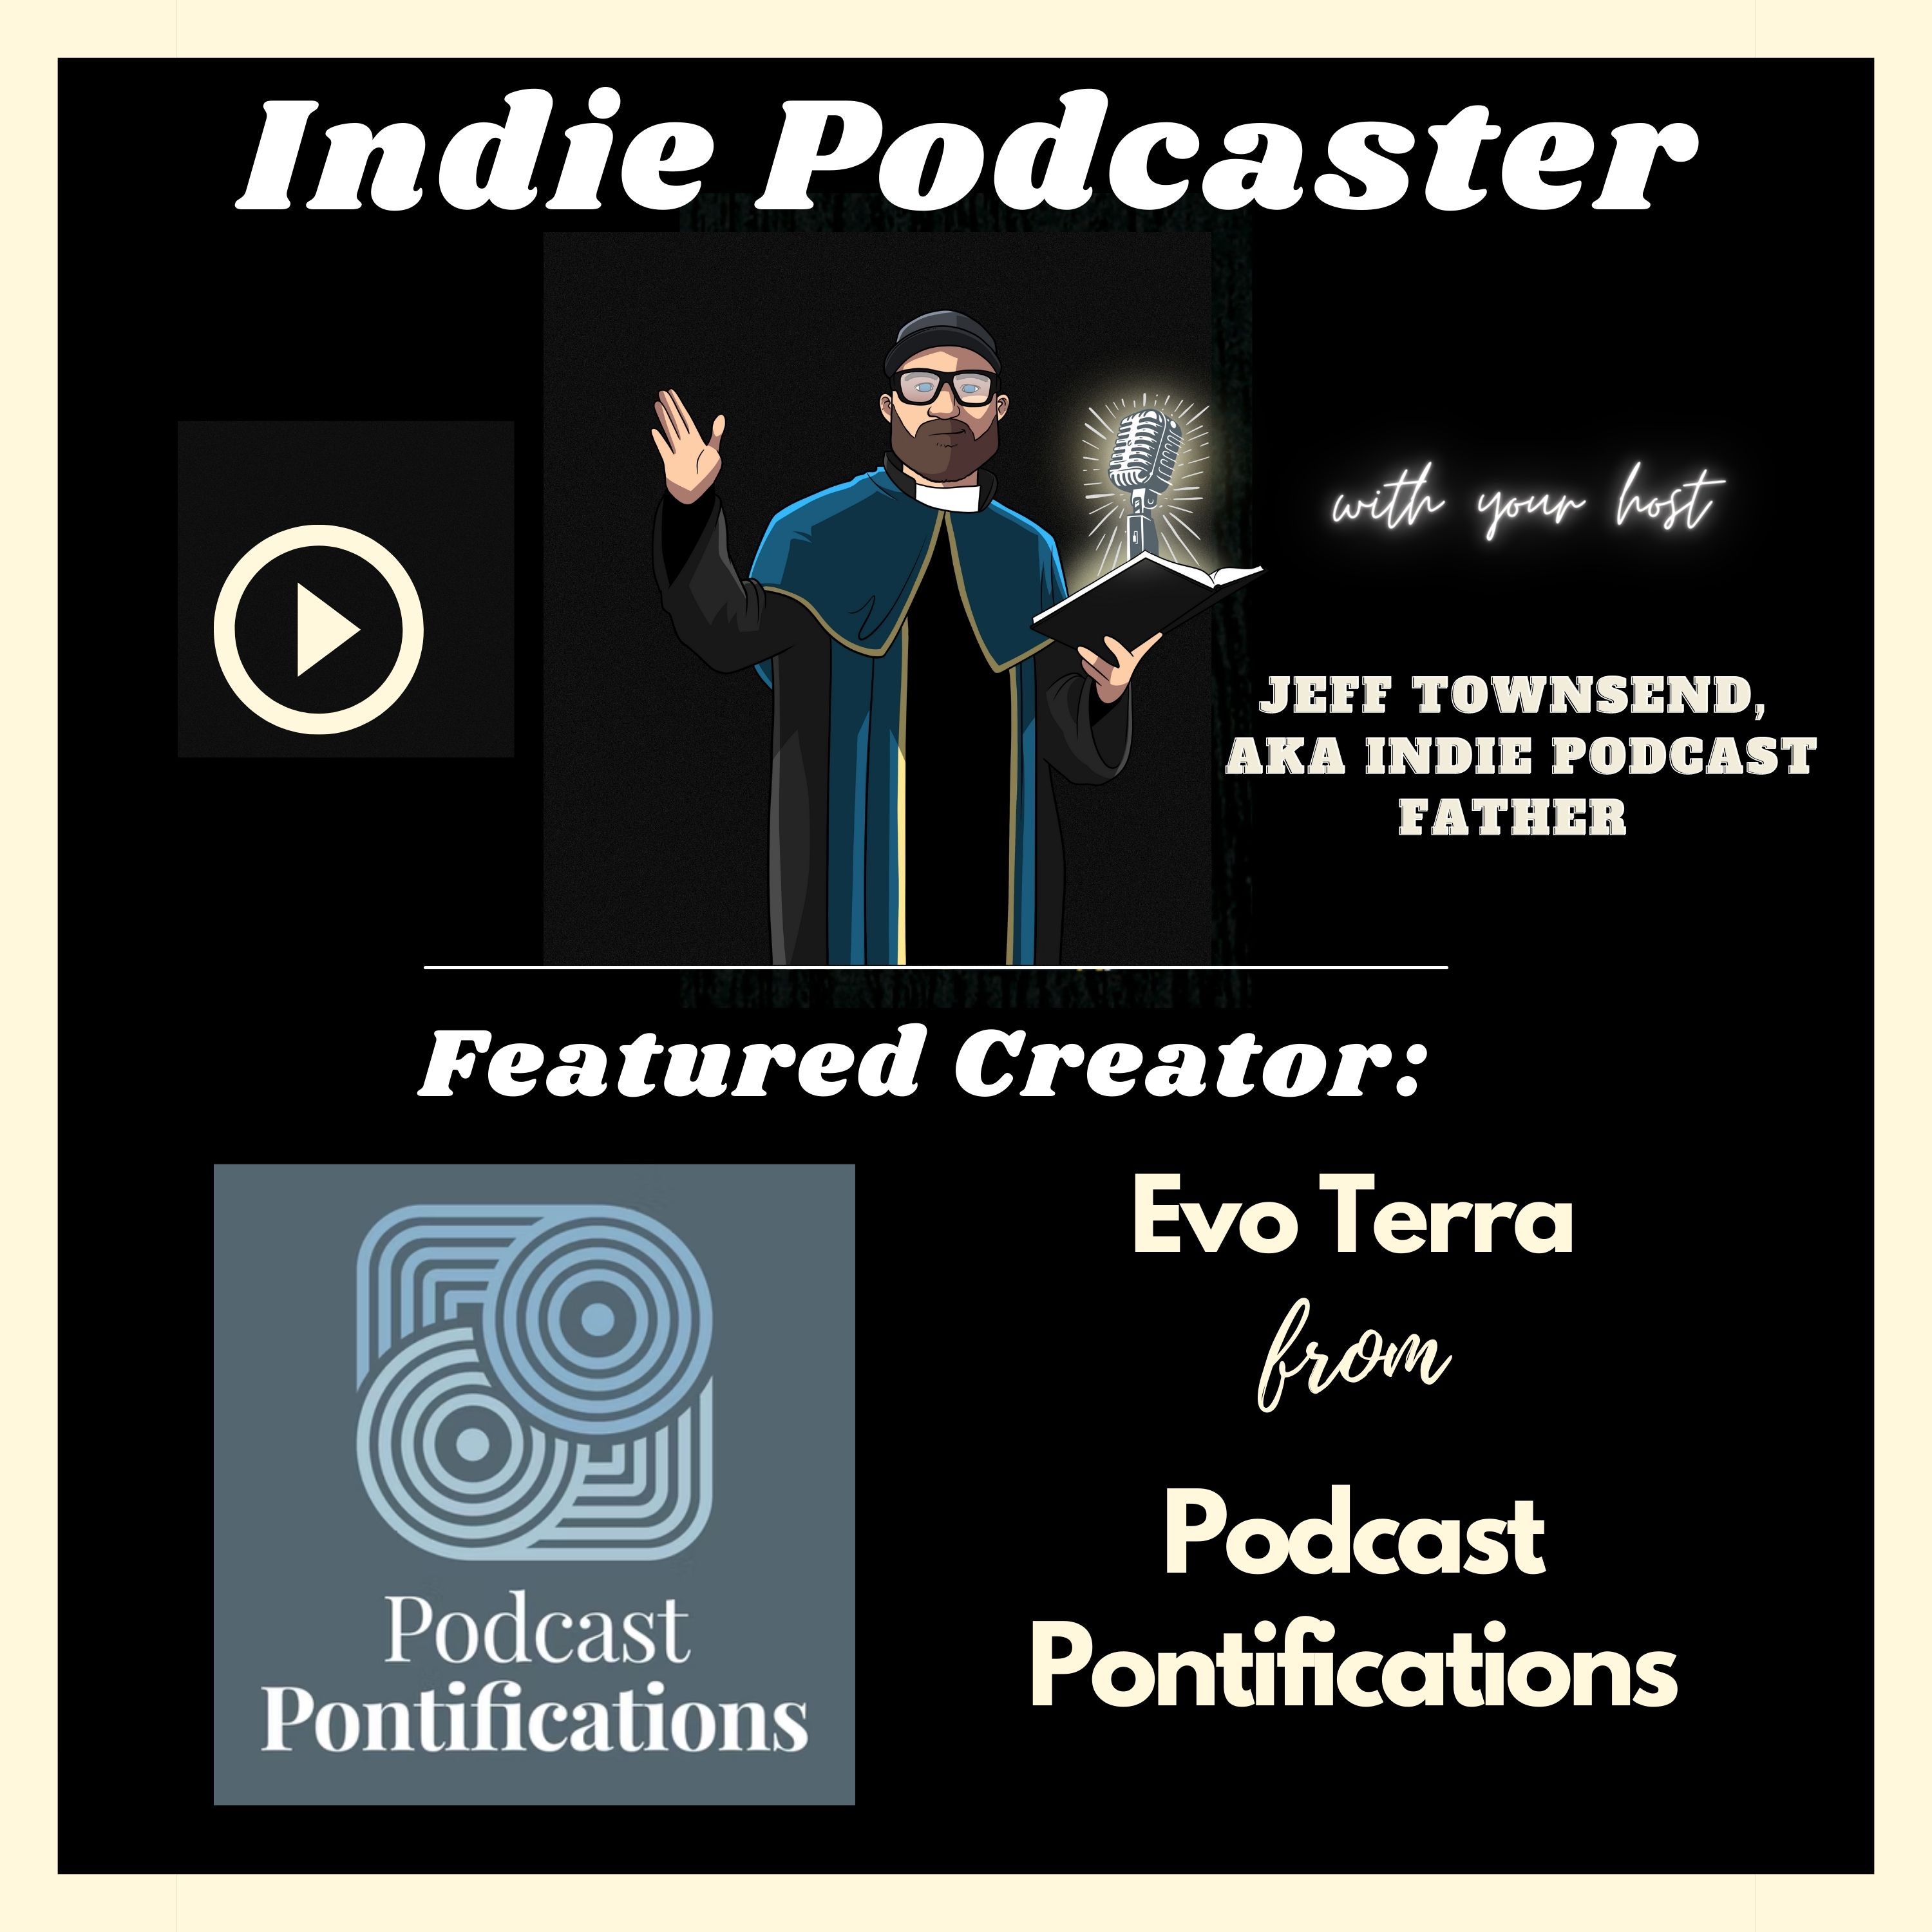 Evo Terra from Podcast Pontifications Image